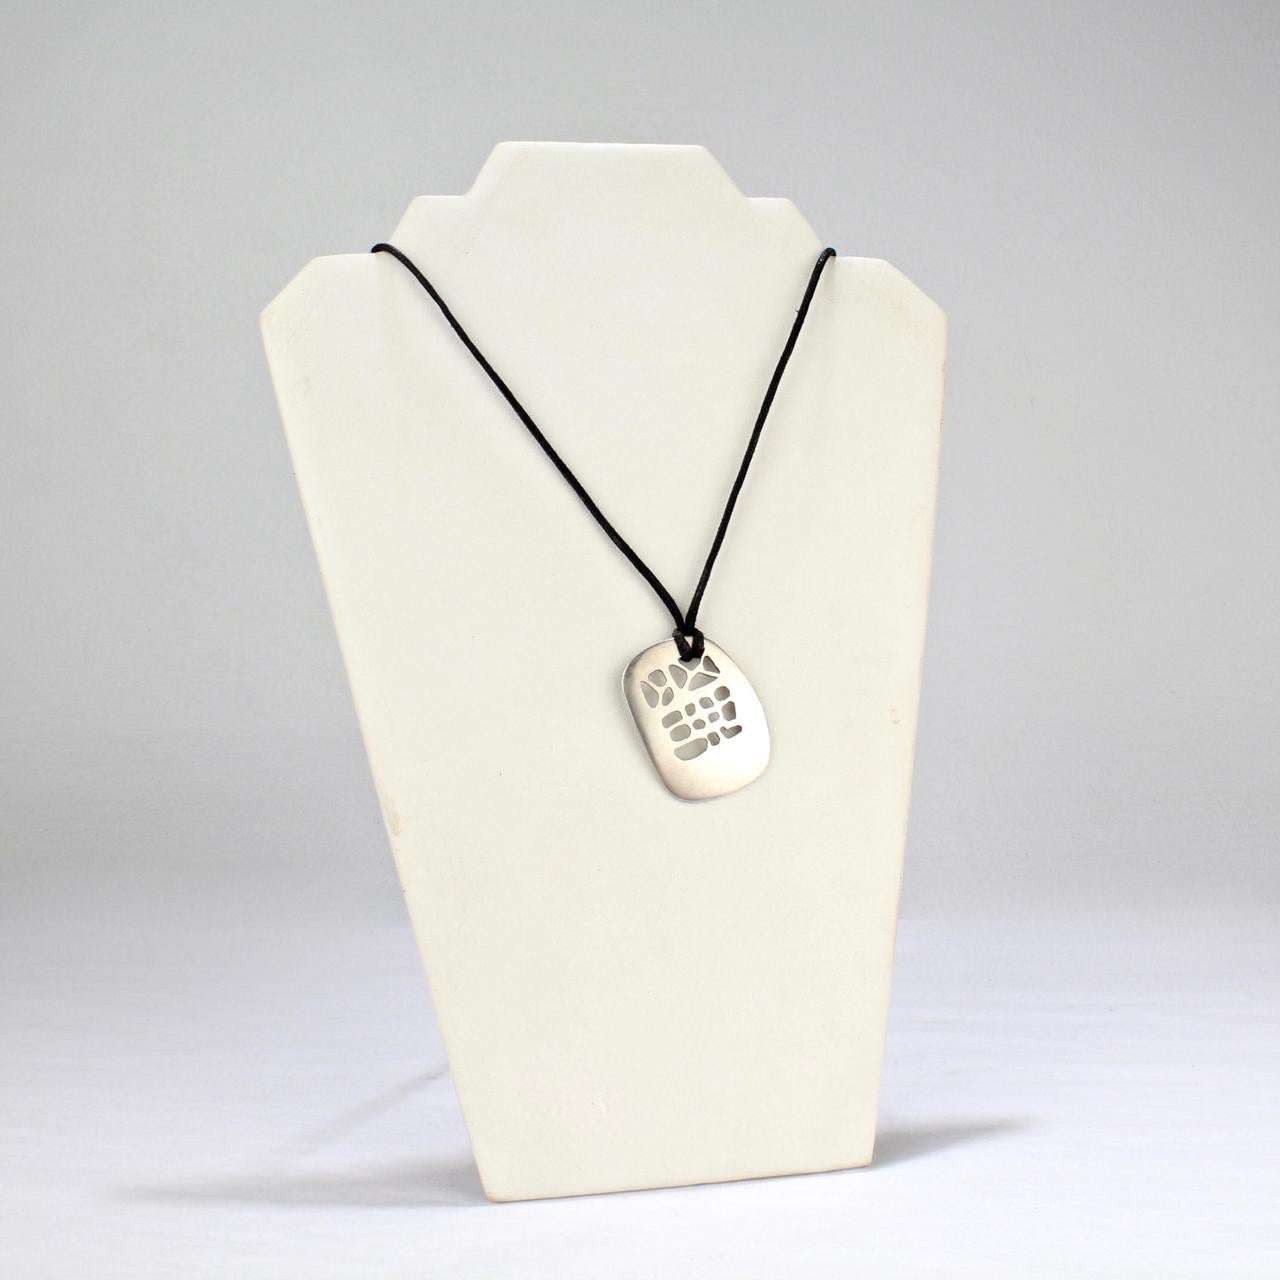 A simple modernist pendant by Philip Morton in sterling silver.

Of slightly convex tablet form with organic pierced openings suspended by a later associated black cord.

Philip Morton was a founding member of SNAG, the Society of North American